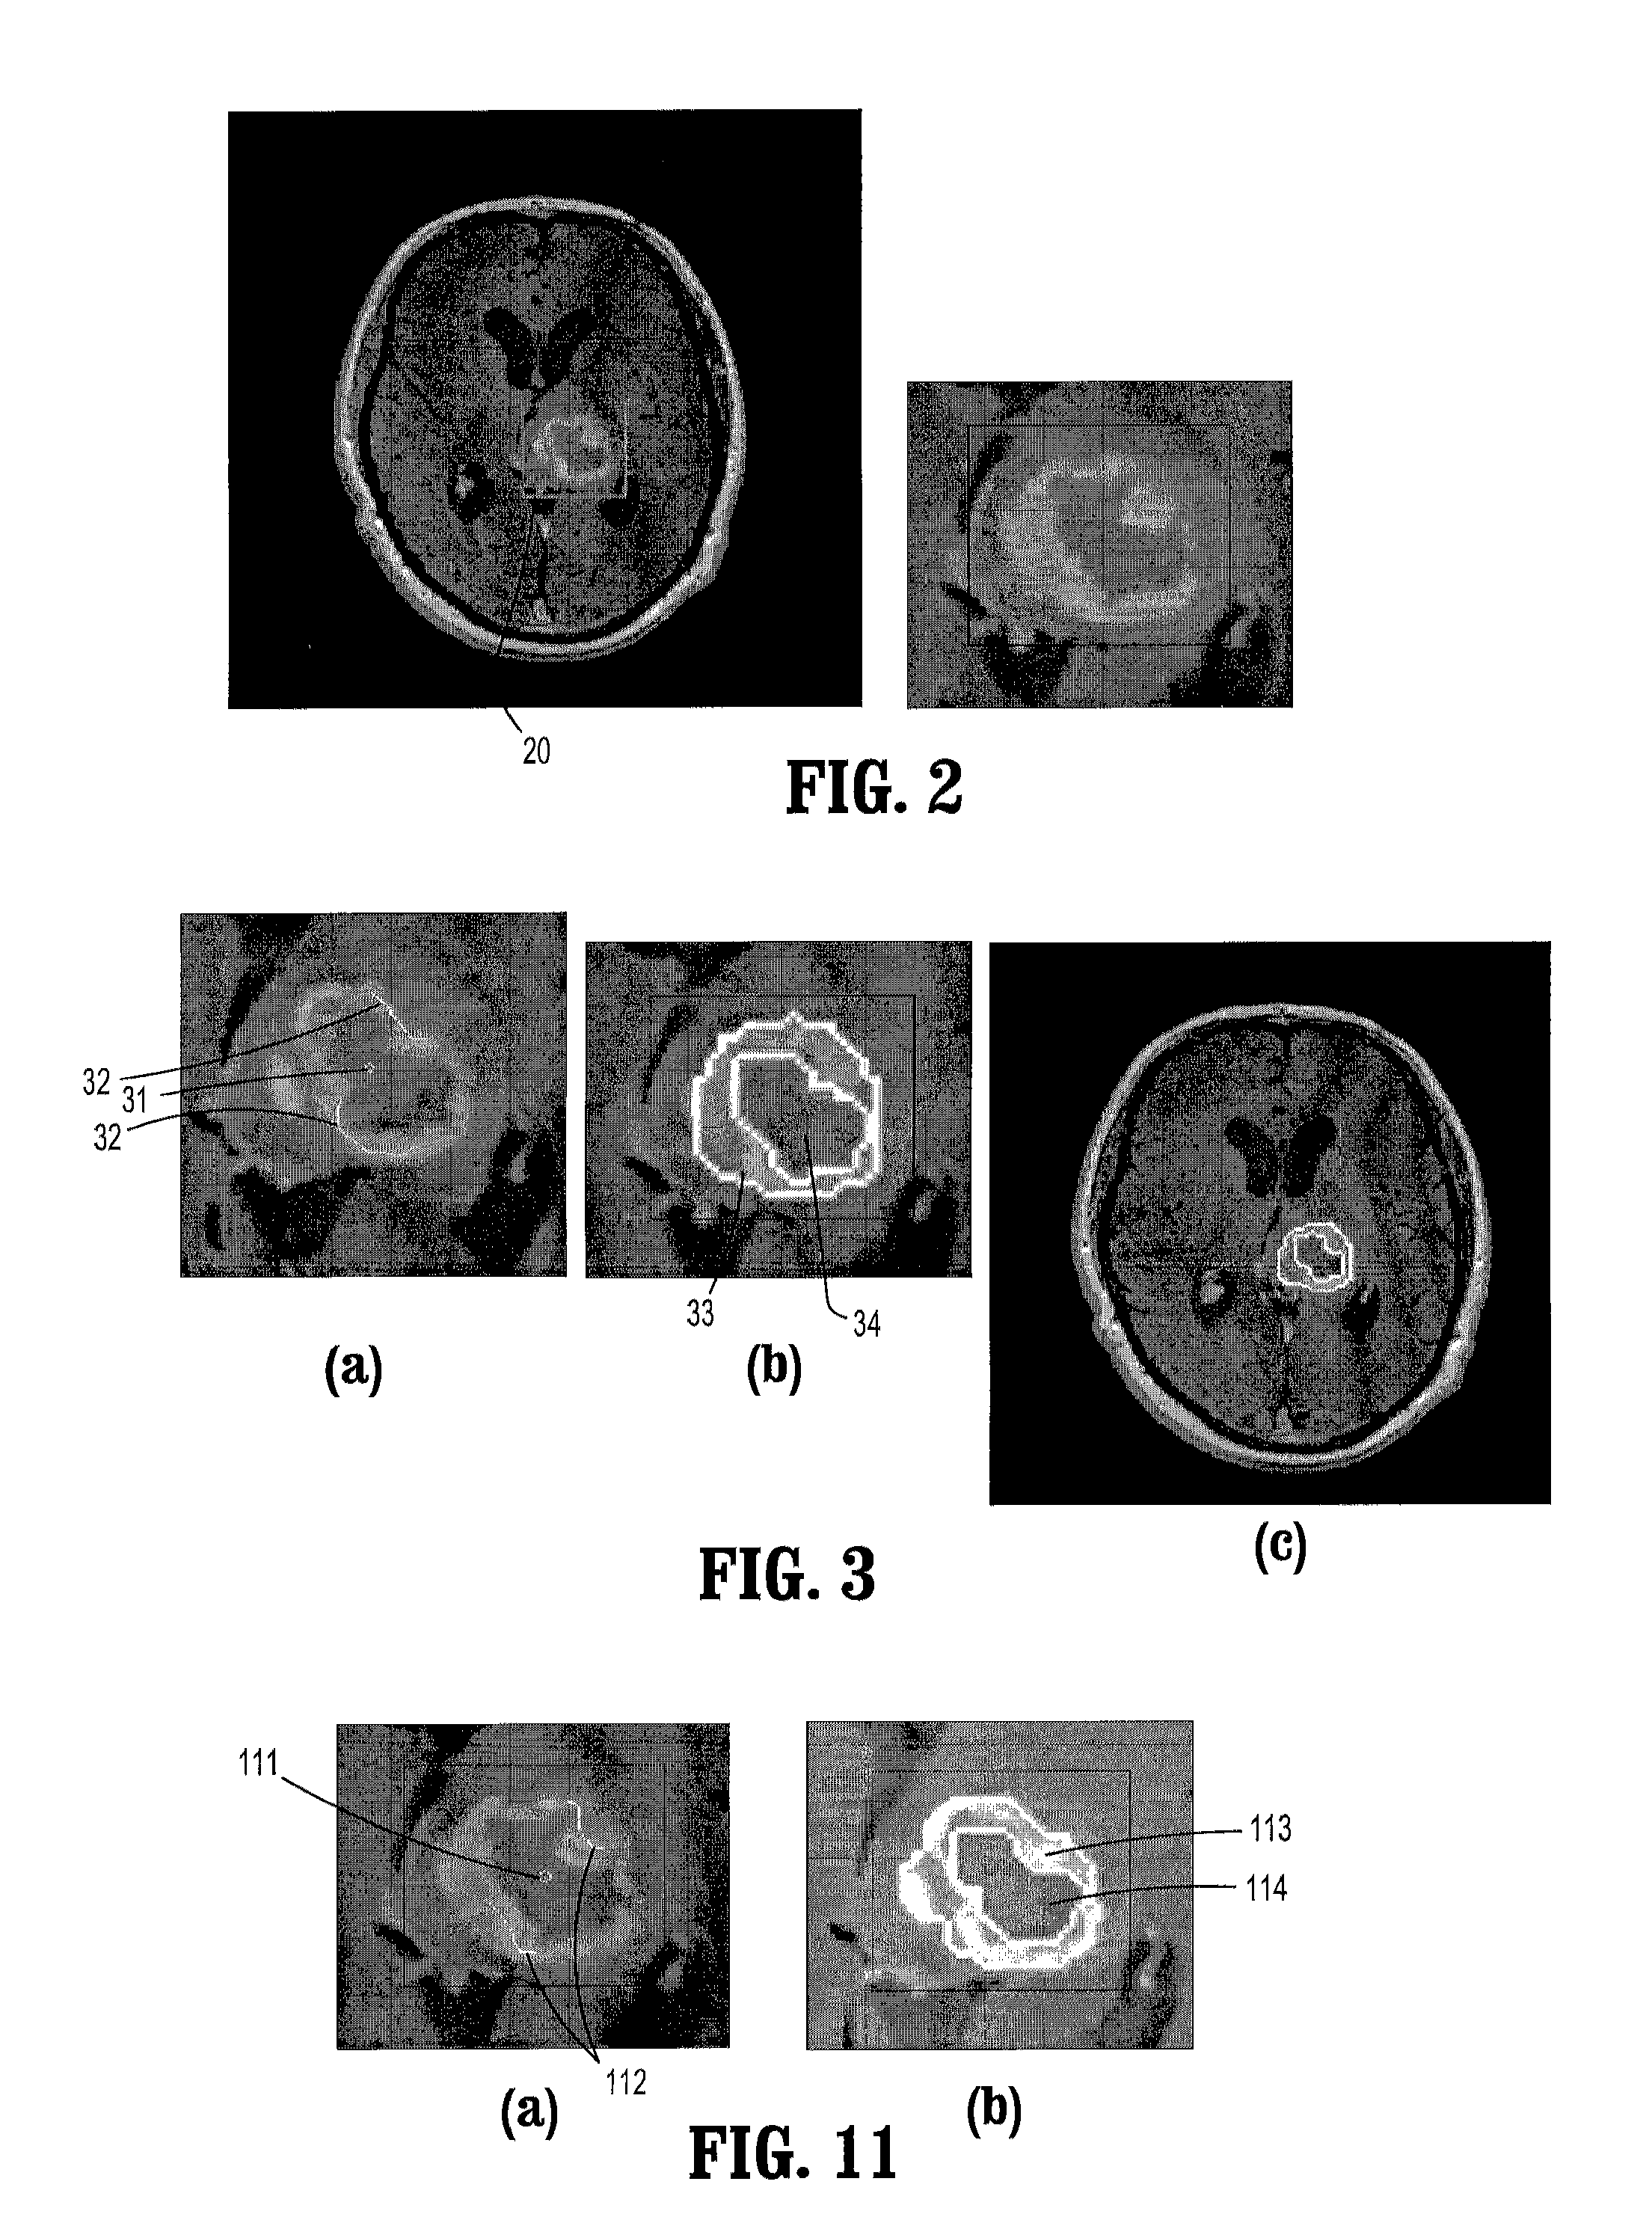 System and method for lesion segmentation in whole body magnetic resonance images